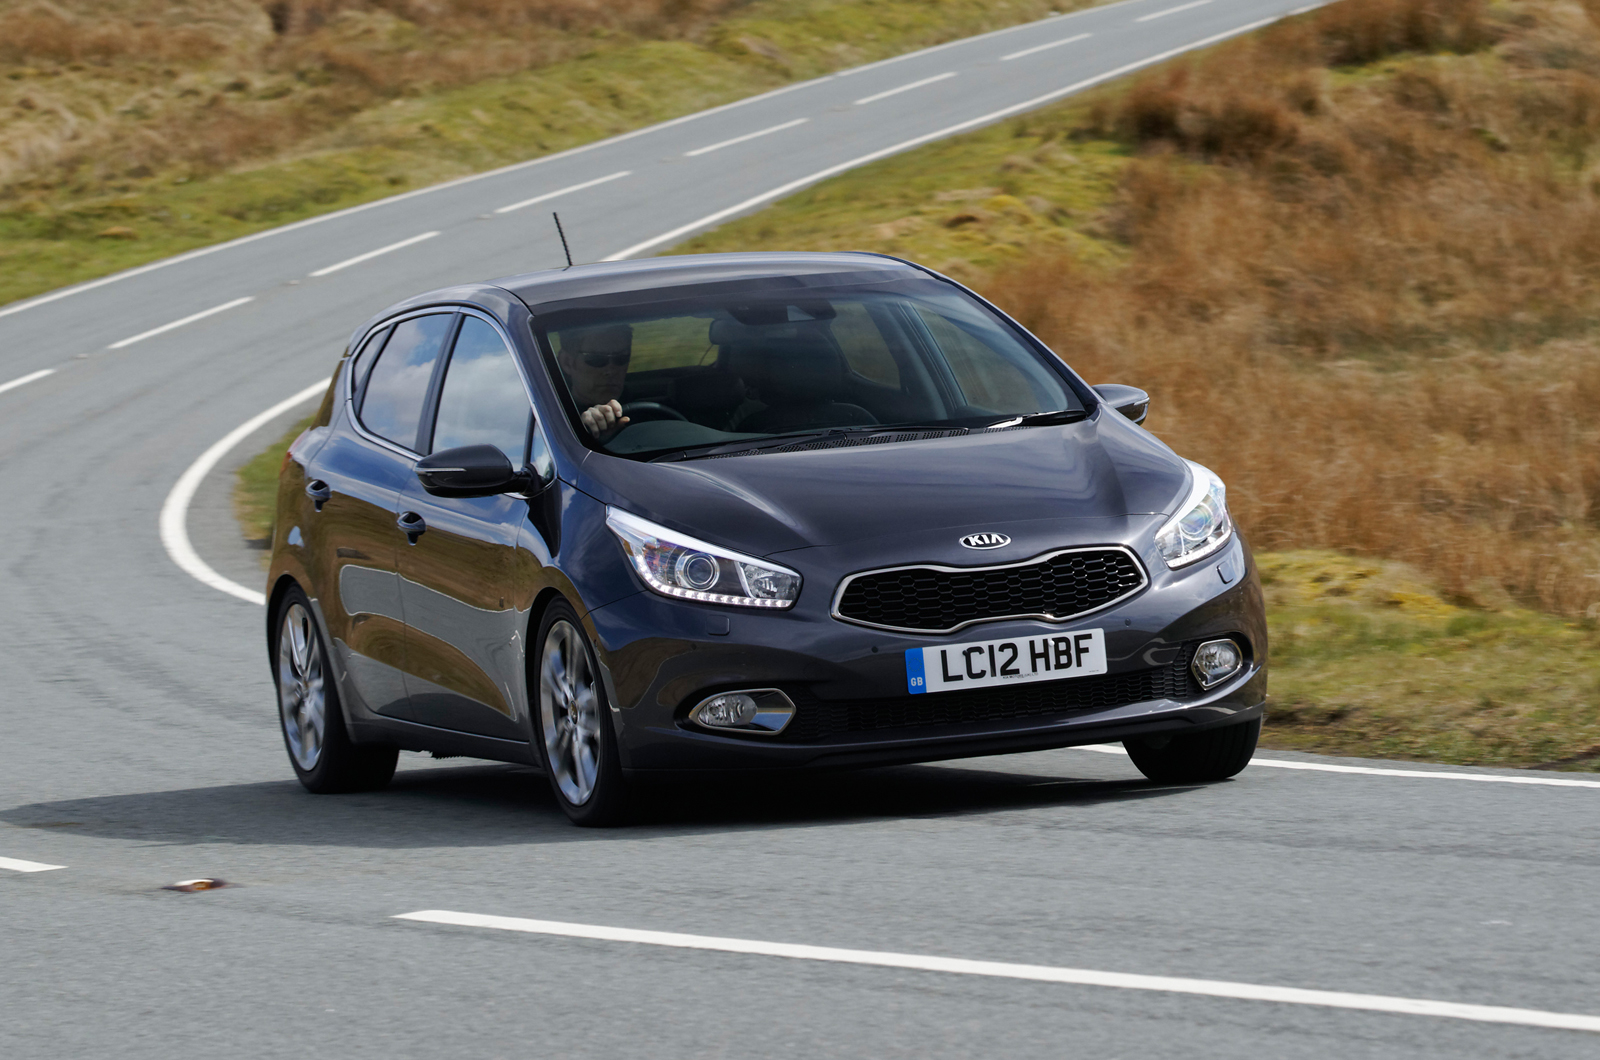 New Kia Cee’d Hatchback from £14,395 in The UK TechnoLOGY